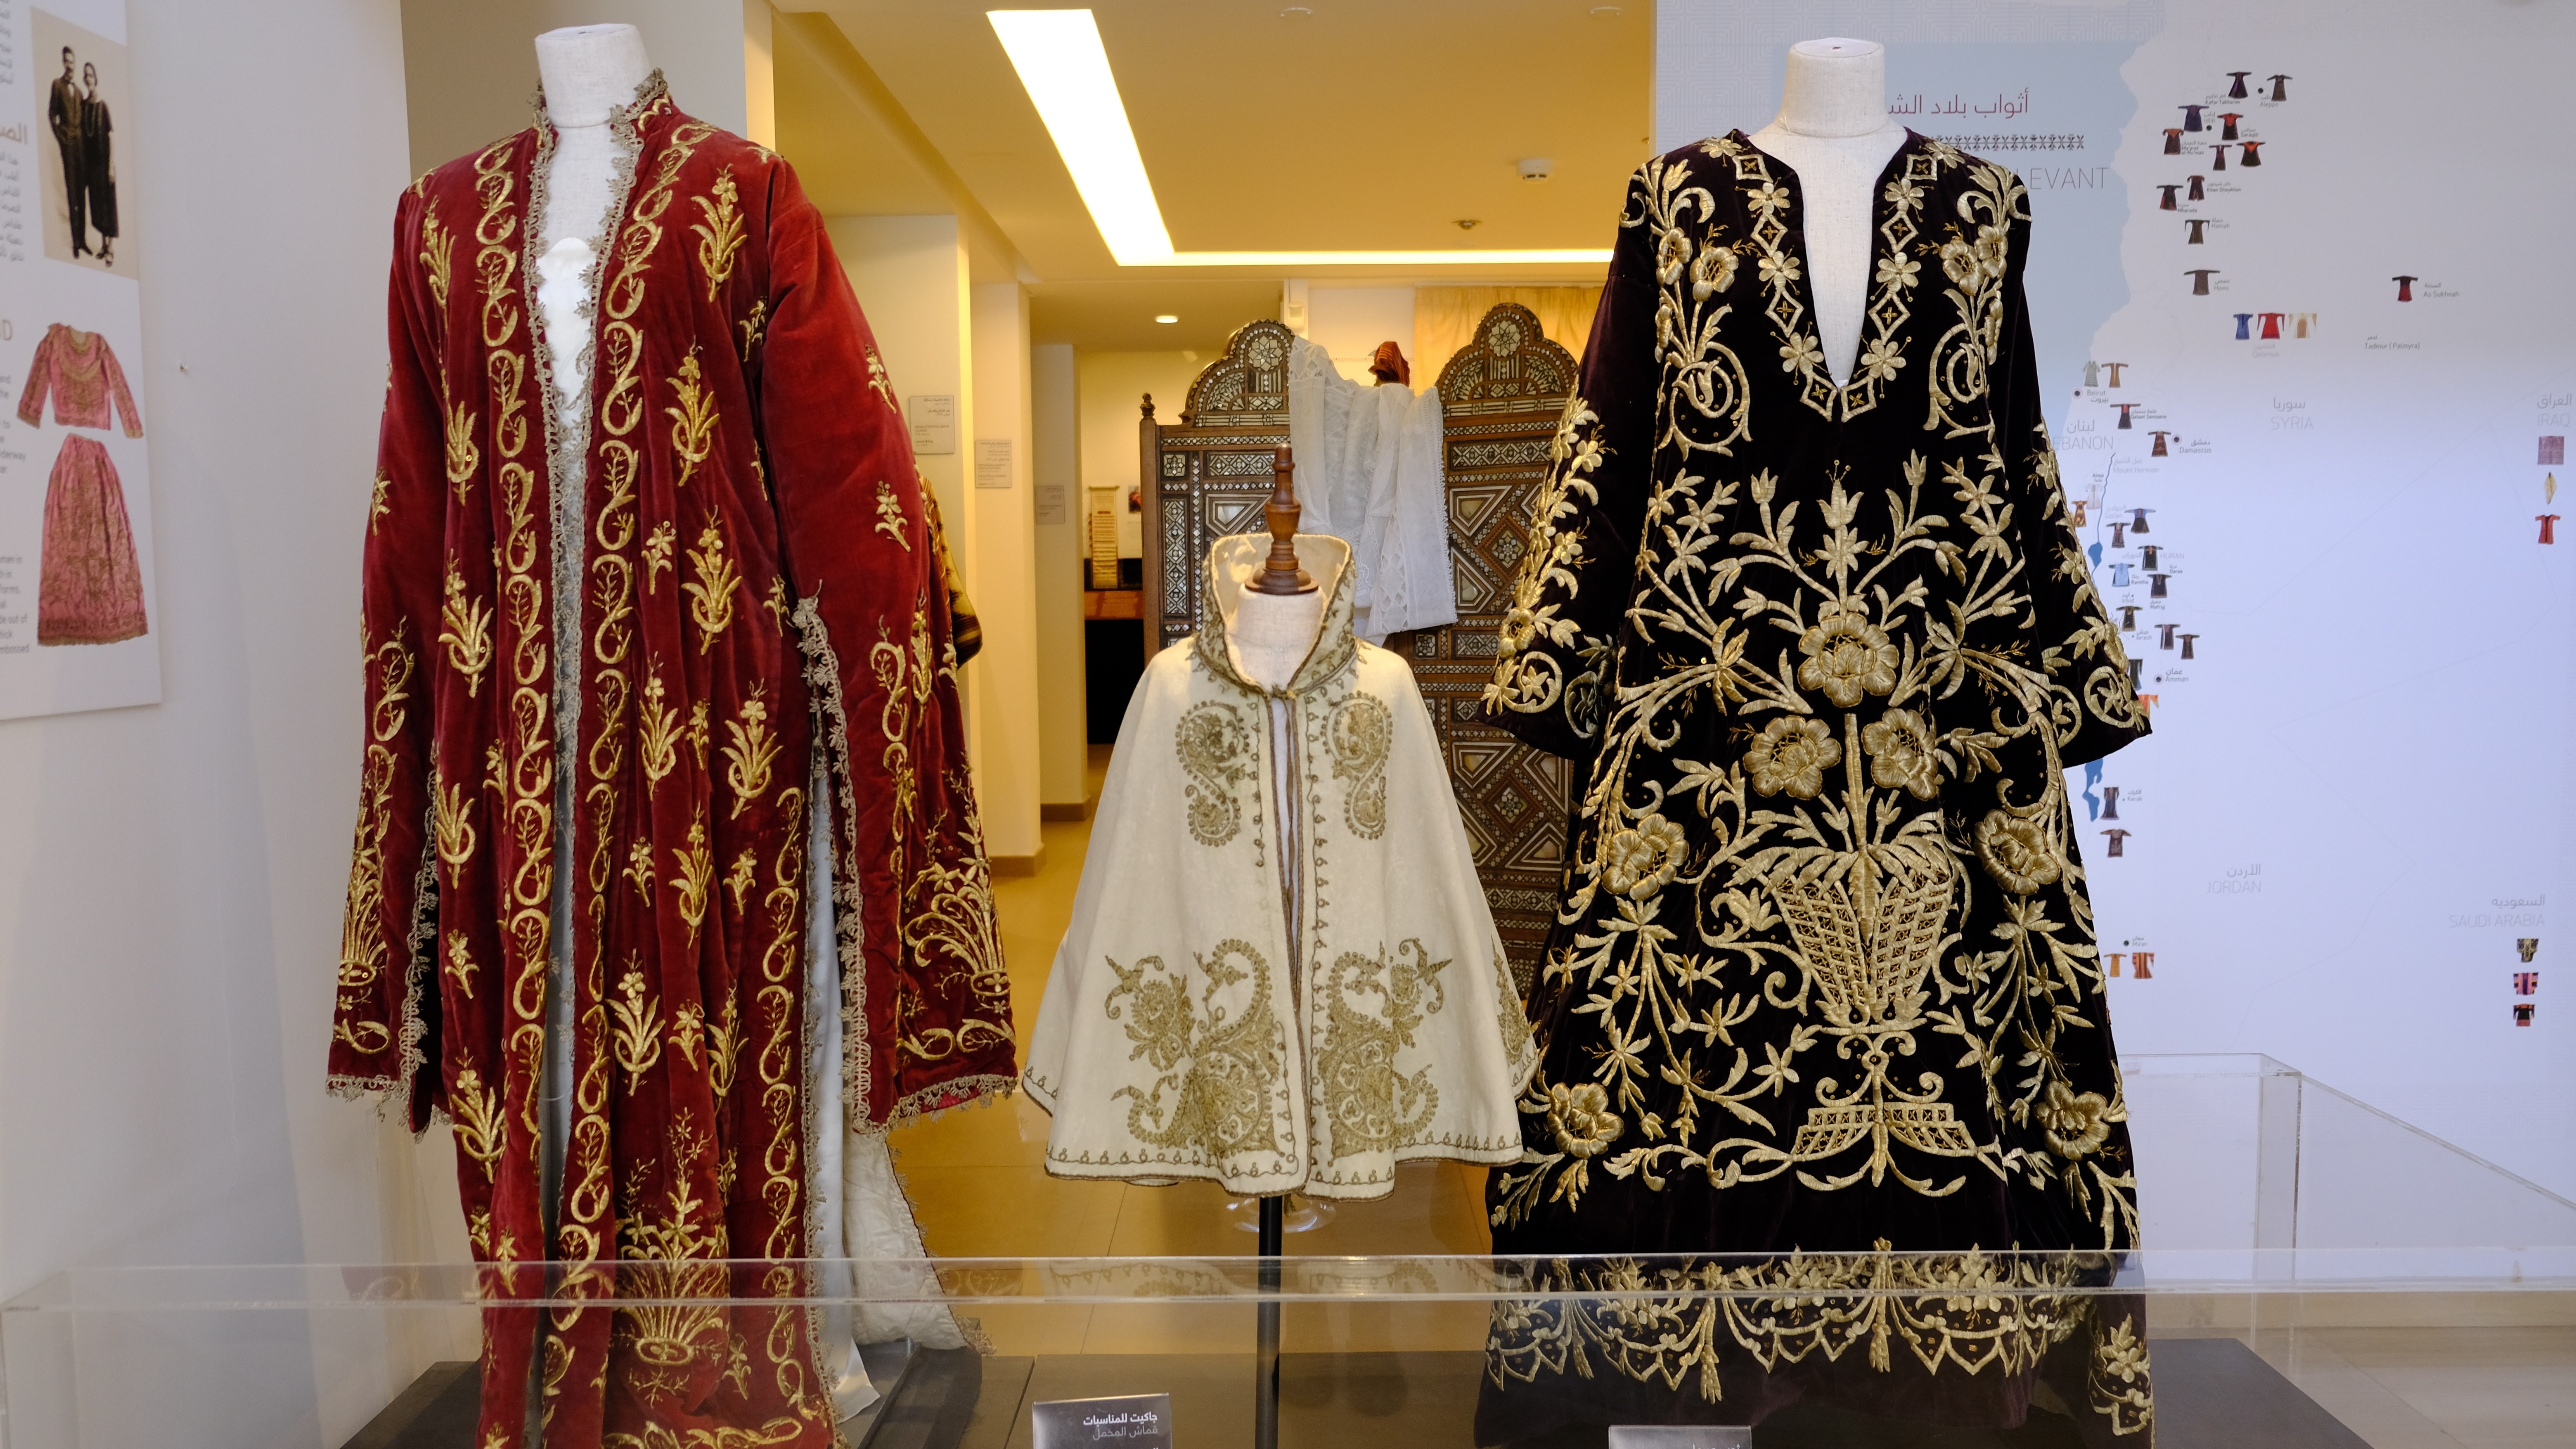 Luxurious early 20th-century dresses embroidered with gold thread; the dress on the right is a wedding dress from Palestine from 1910, the others from the 1920s (photo: Marta Vidal)